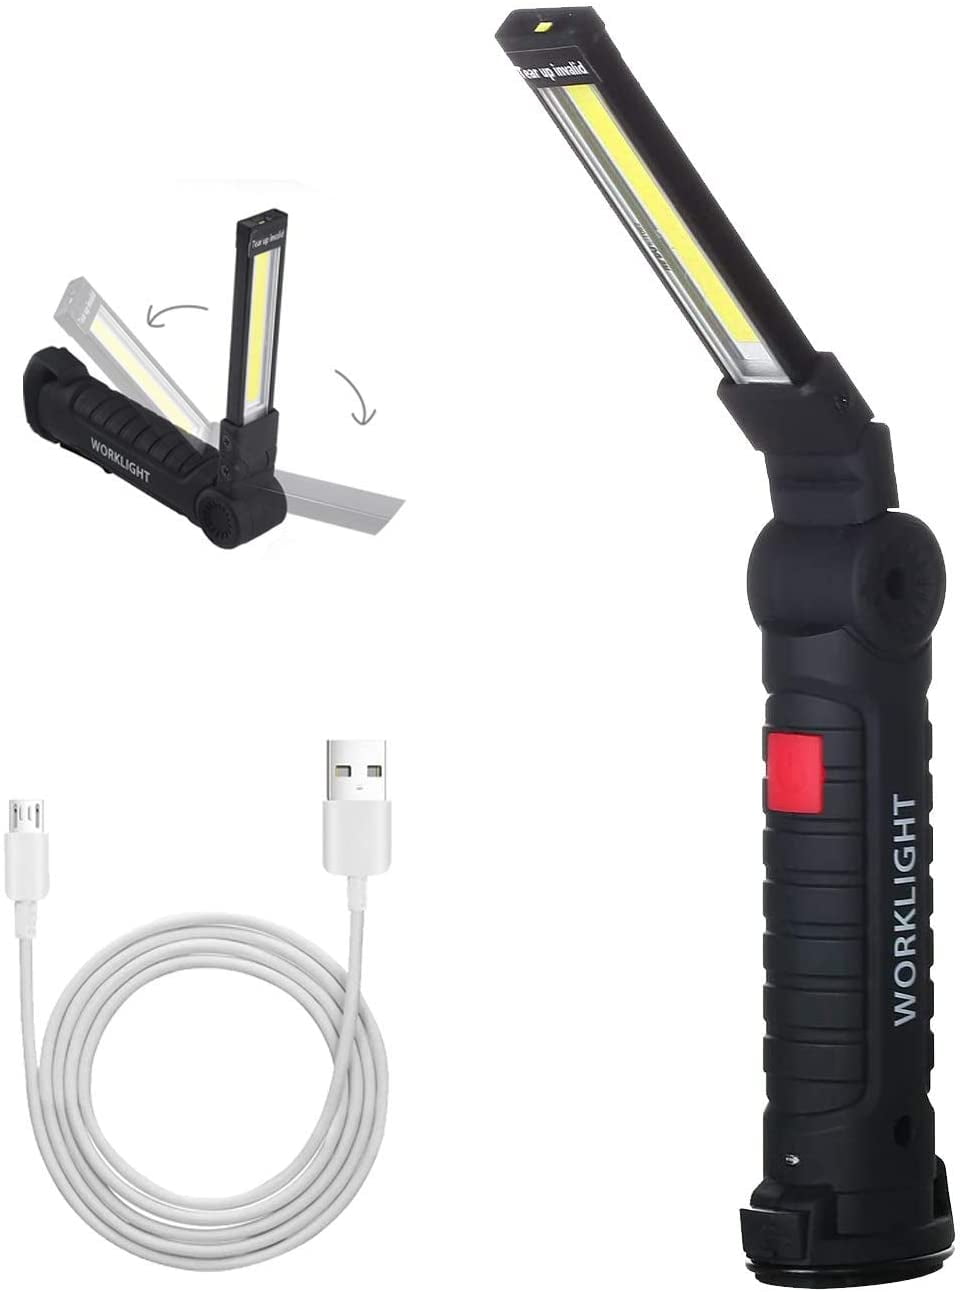 USB Cable Portable Rechargeable COB LED Slim Work Light Lamp Torch Flashlight 